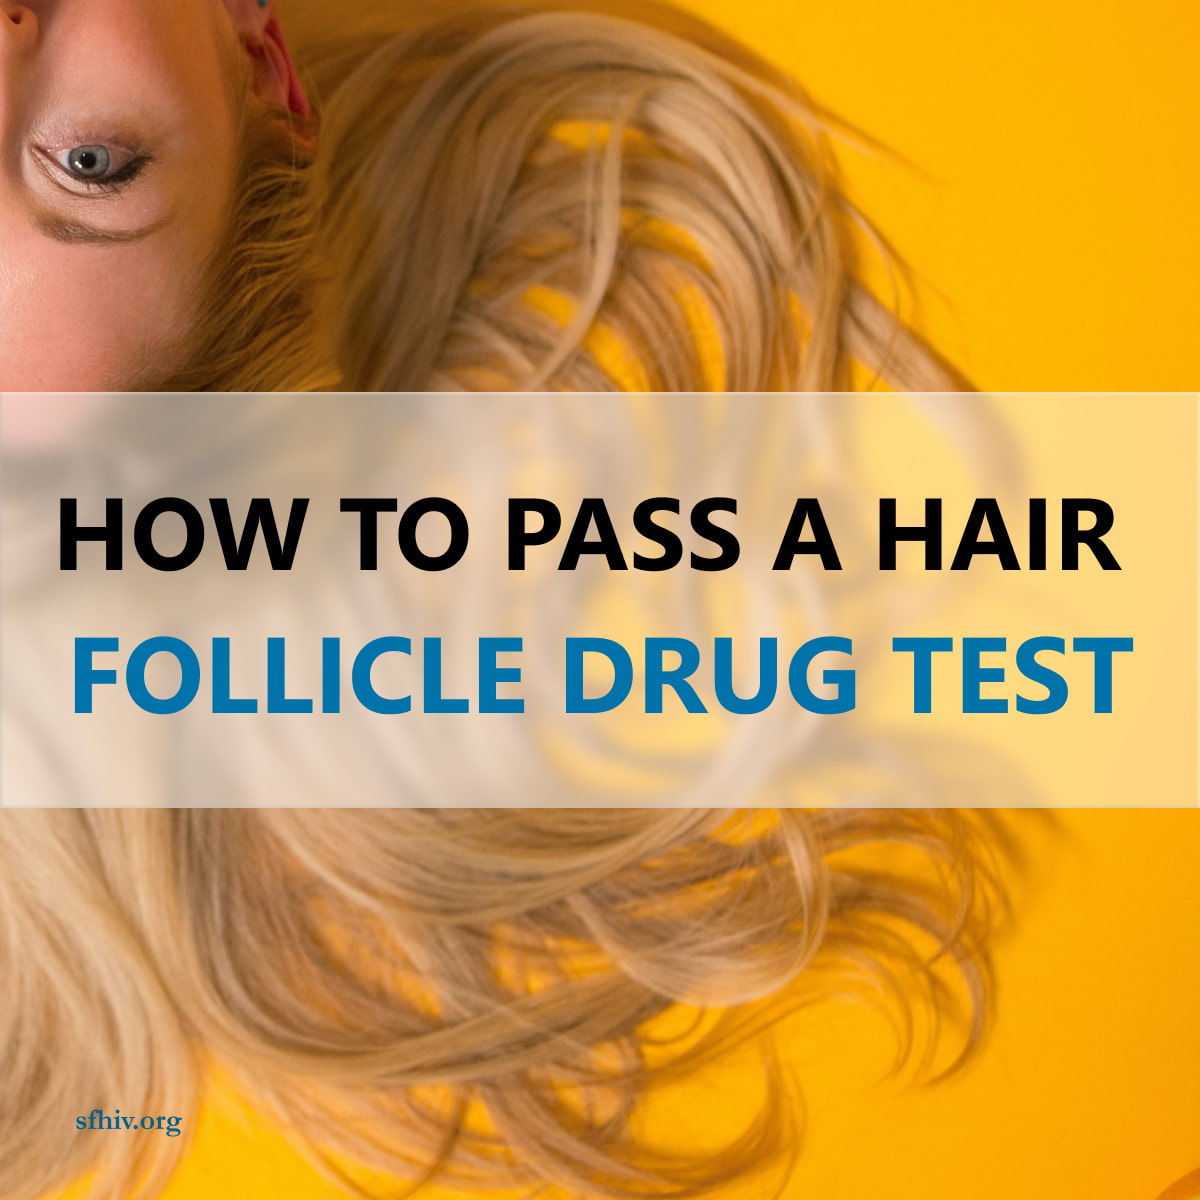 How To Pass a Hair Follicle Drug Test In 24 Hours Using Detox Shampoo